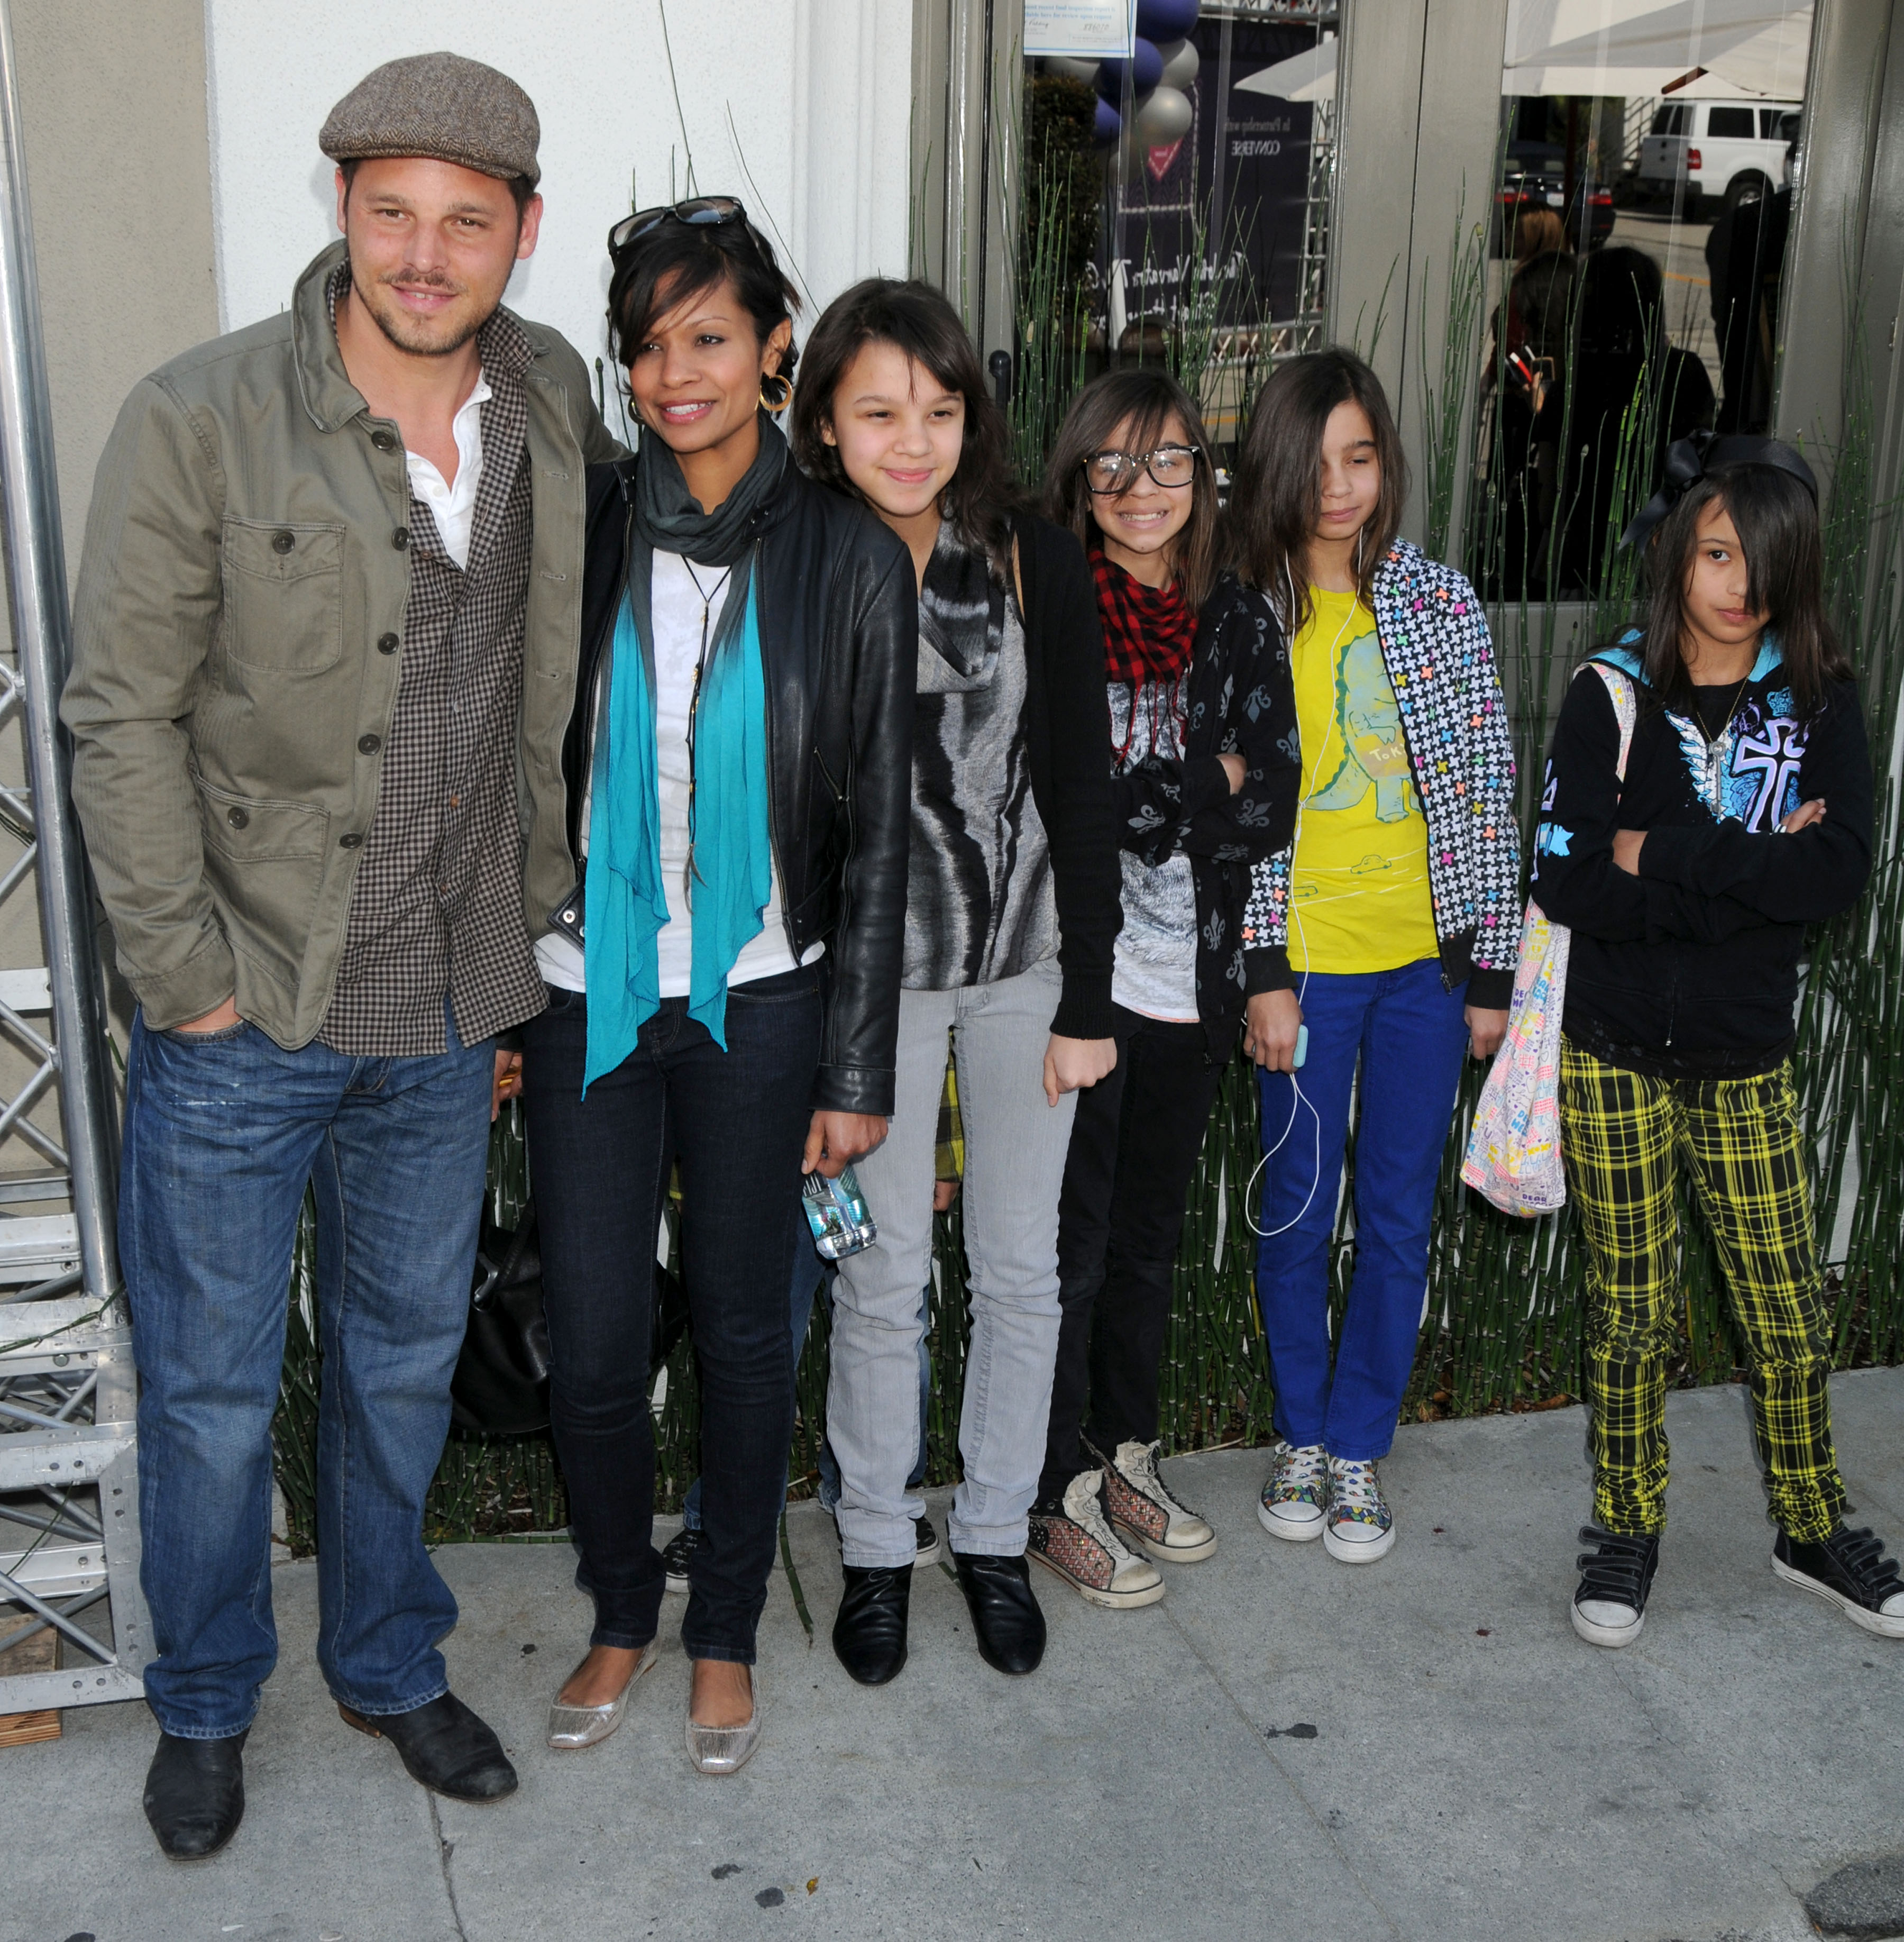 Justin Chambers, Keisha Chambers and their children at the John Varvatos 7th Annual Stuart House Benefit at the John Varvatos Boutique on March 8, 2009 in West Hollywood, California. | Source: Getty Images